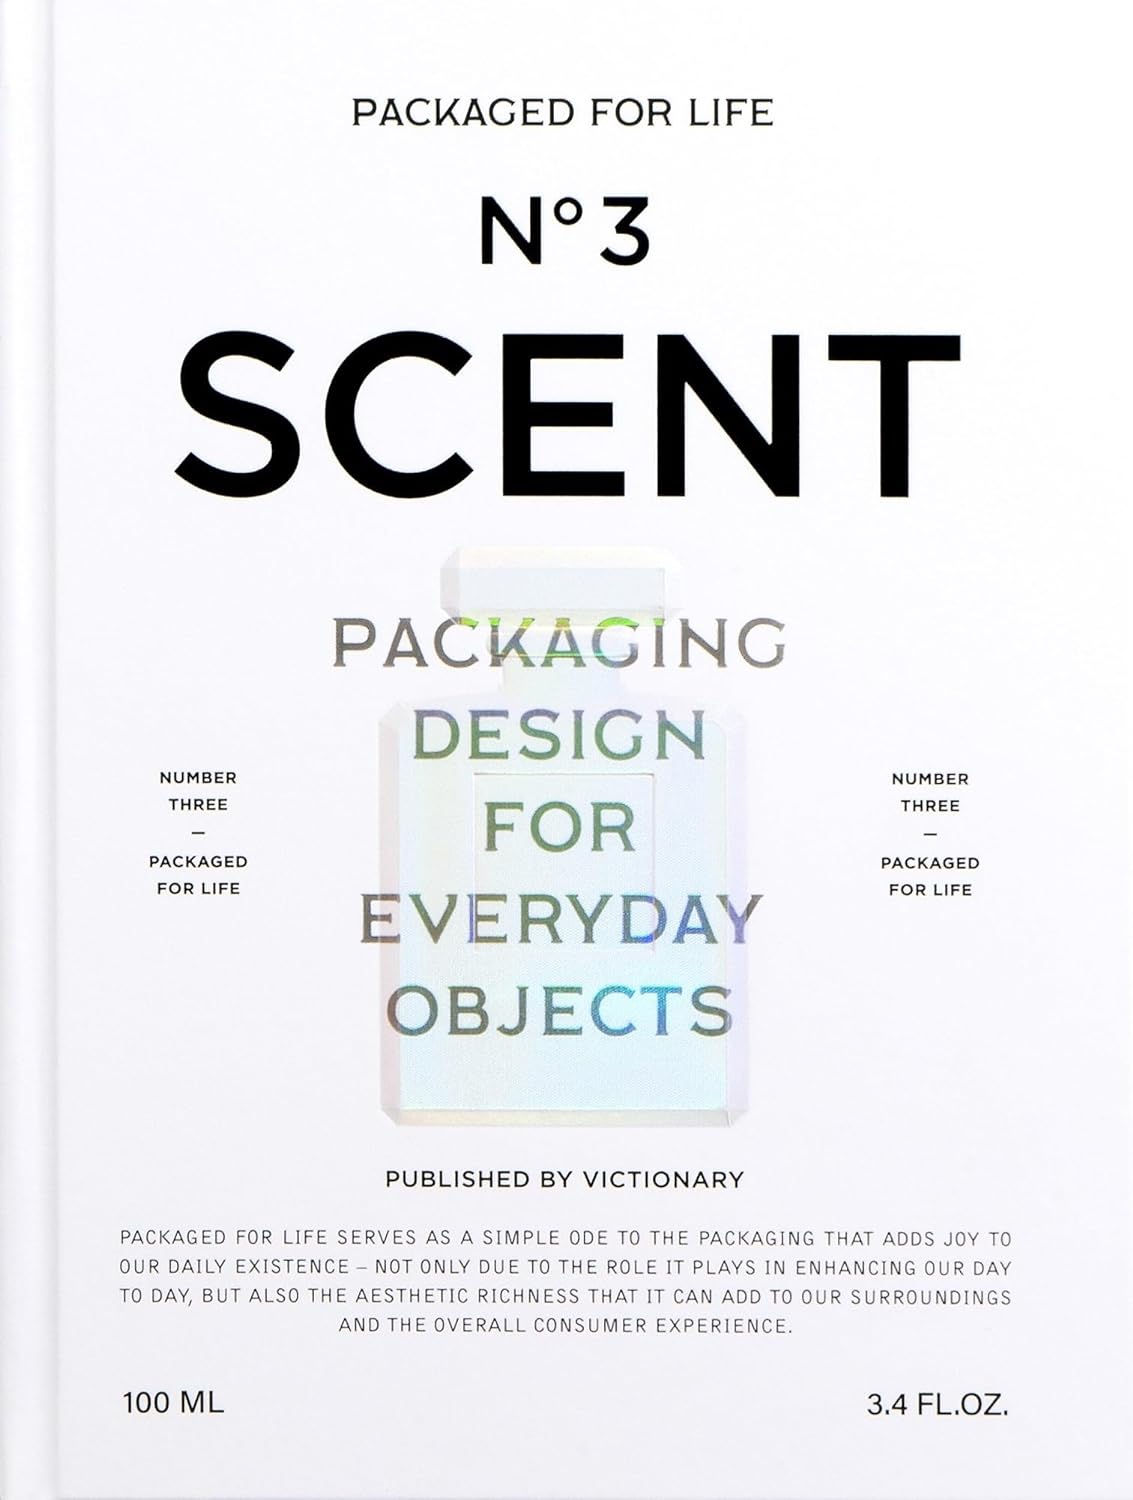 Packaged For Life: Scent